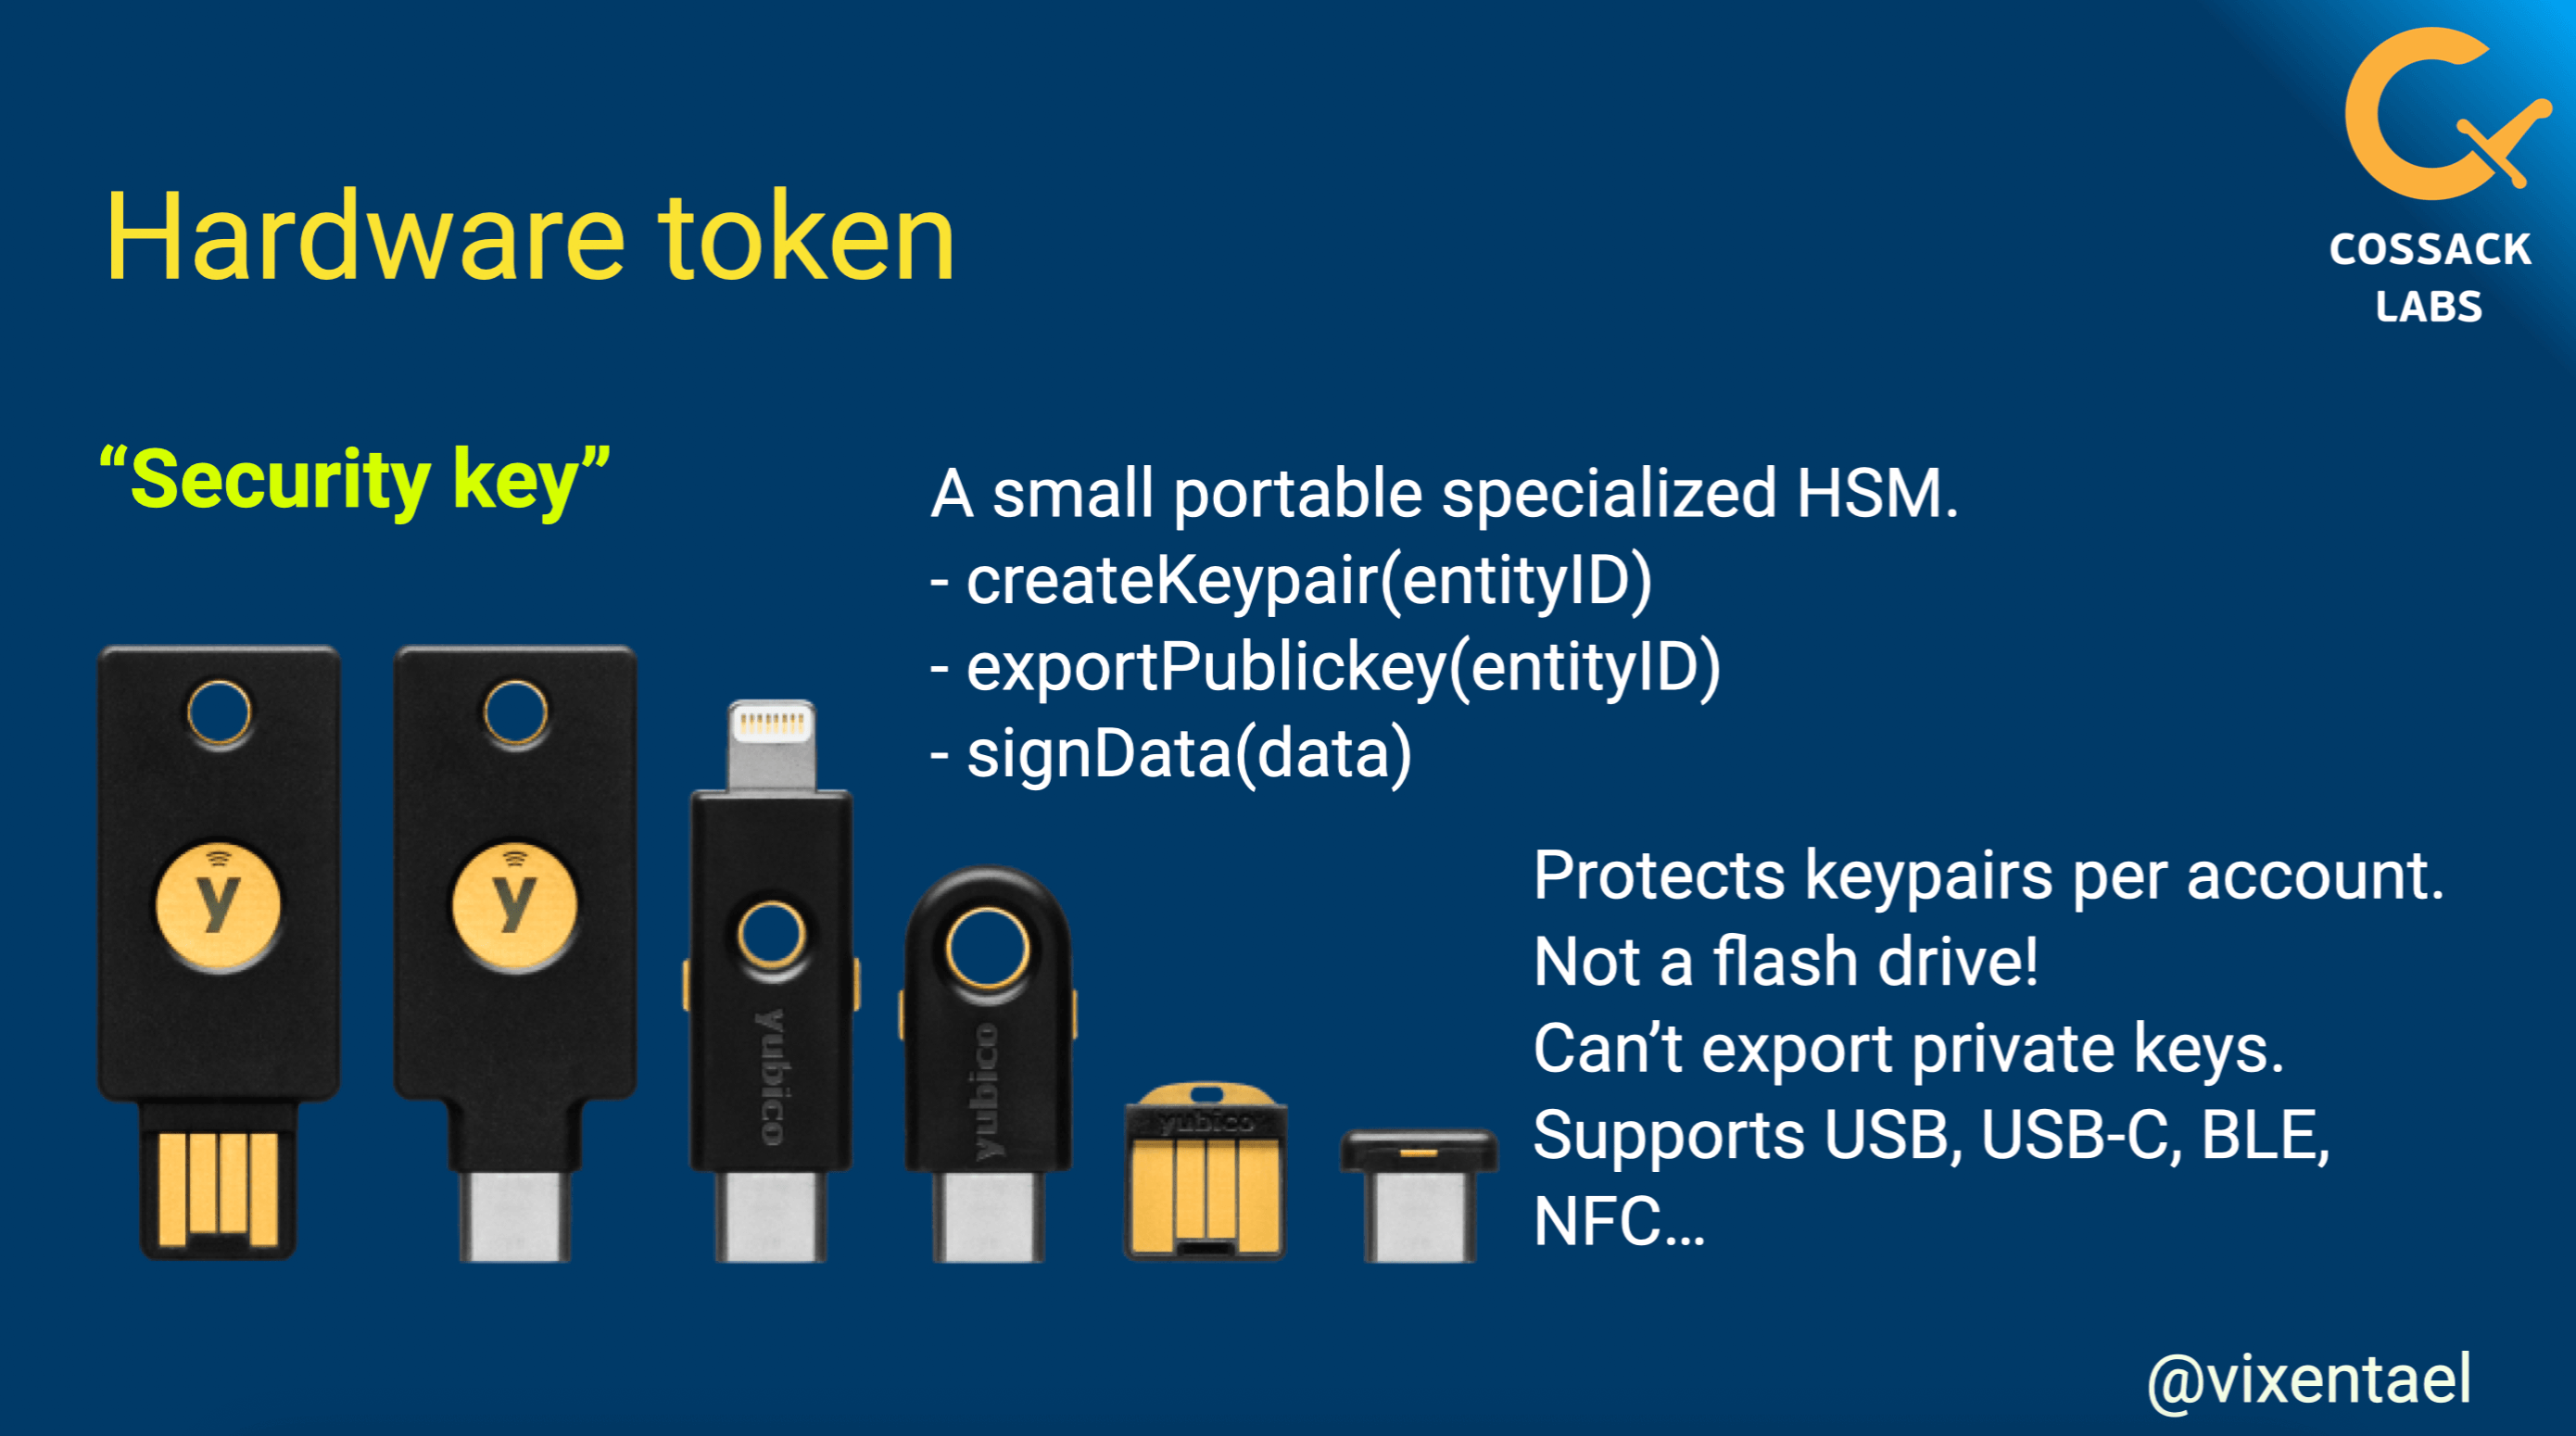 Yubikey as security token supports different connection protocols and comes in different form factors.